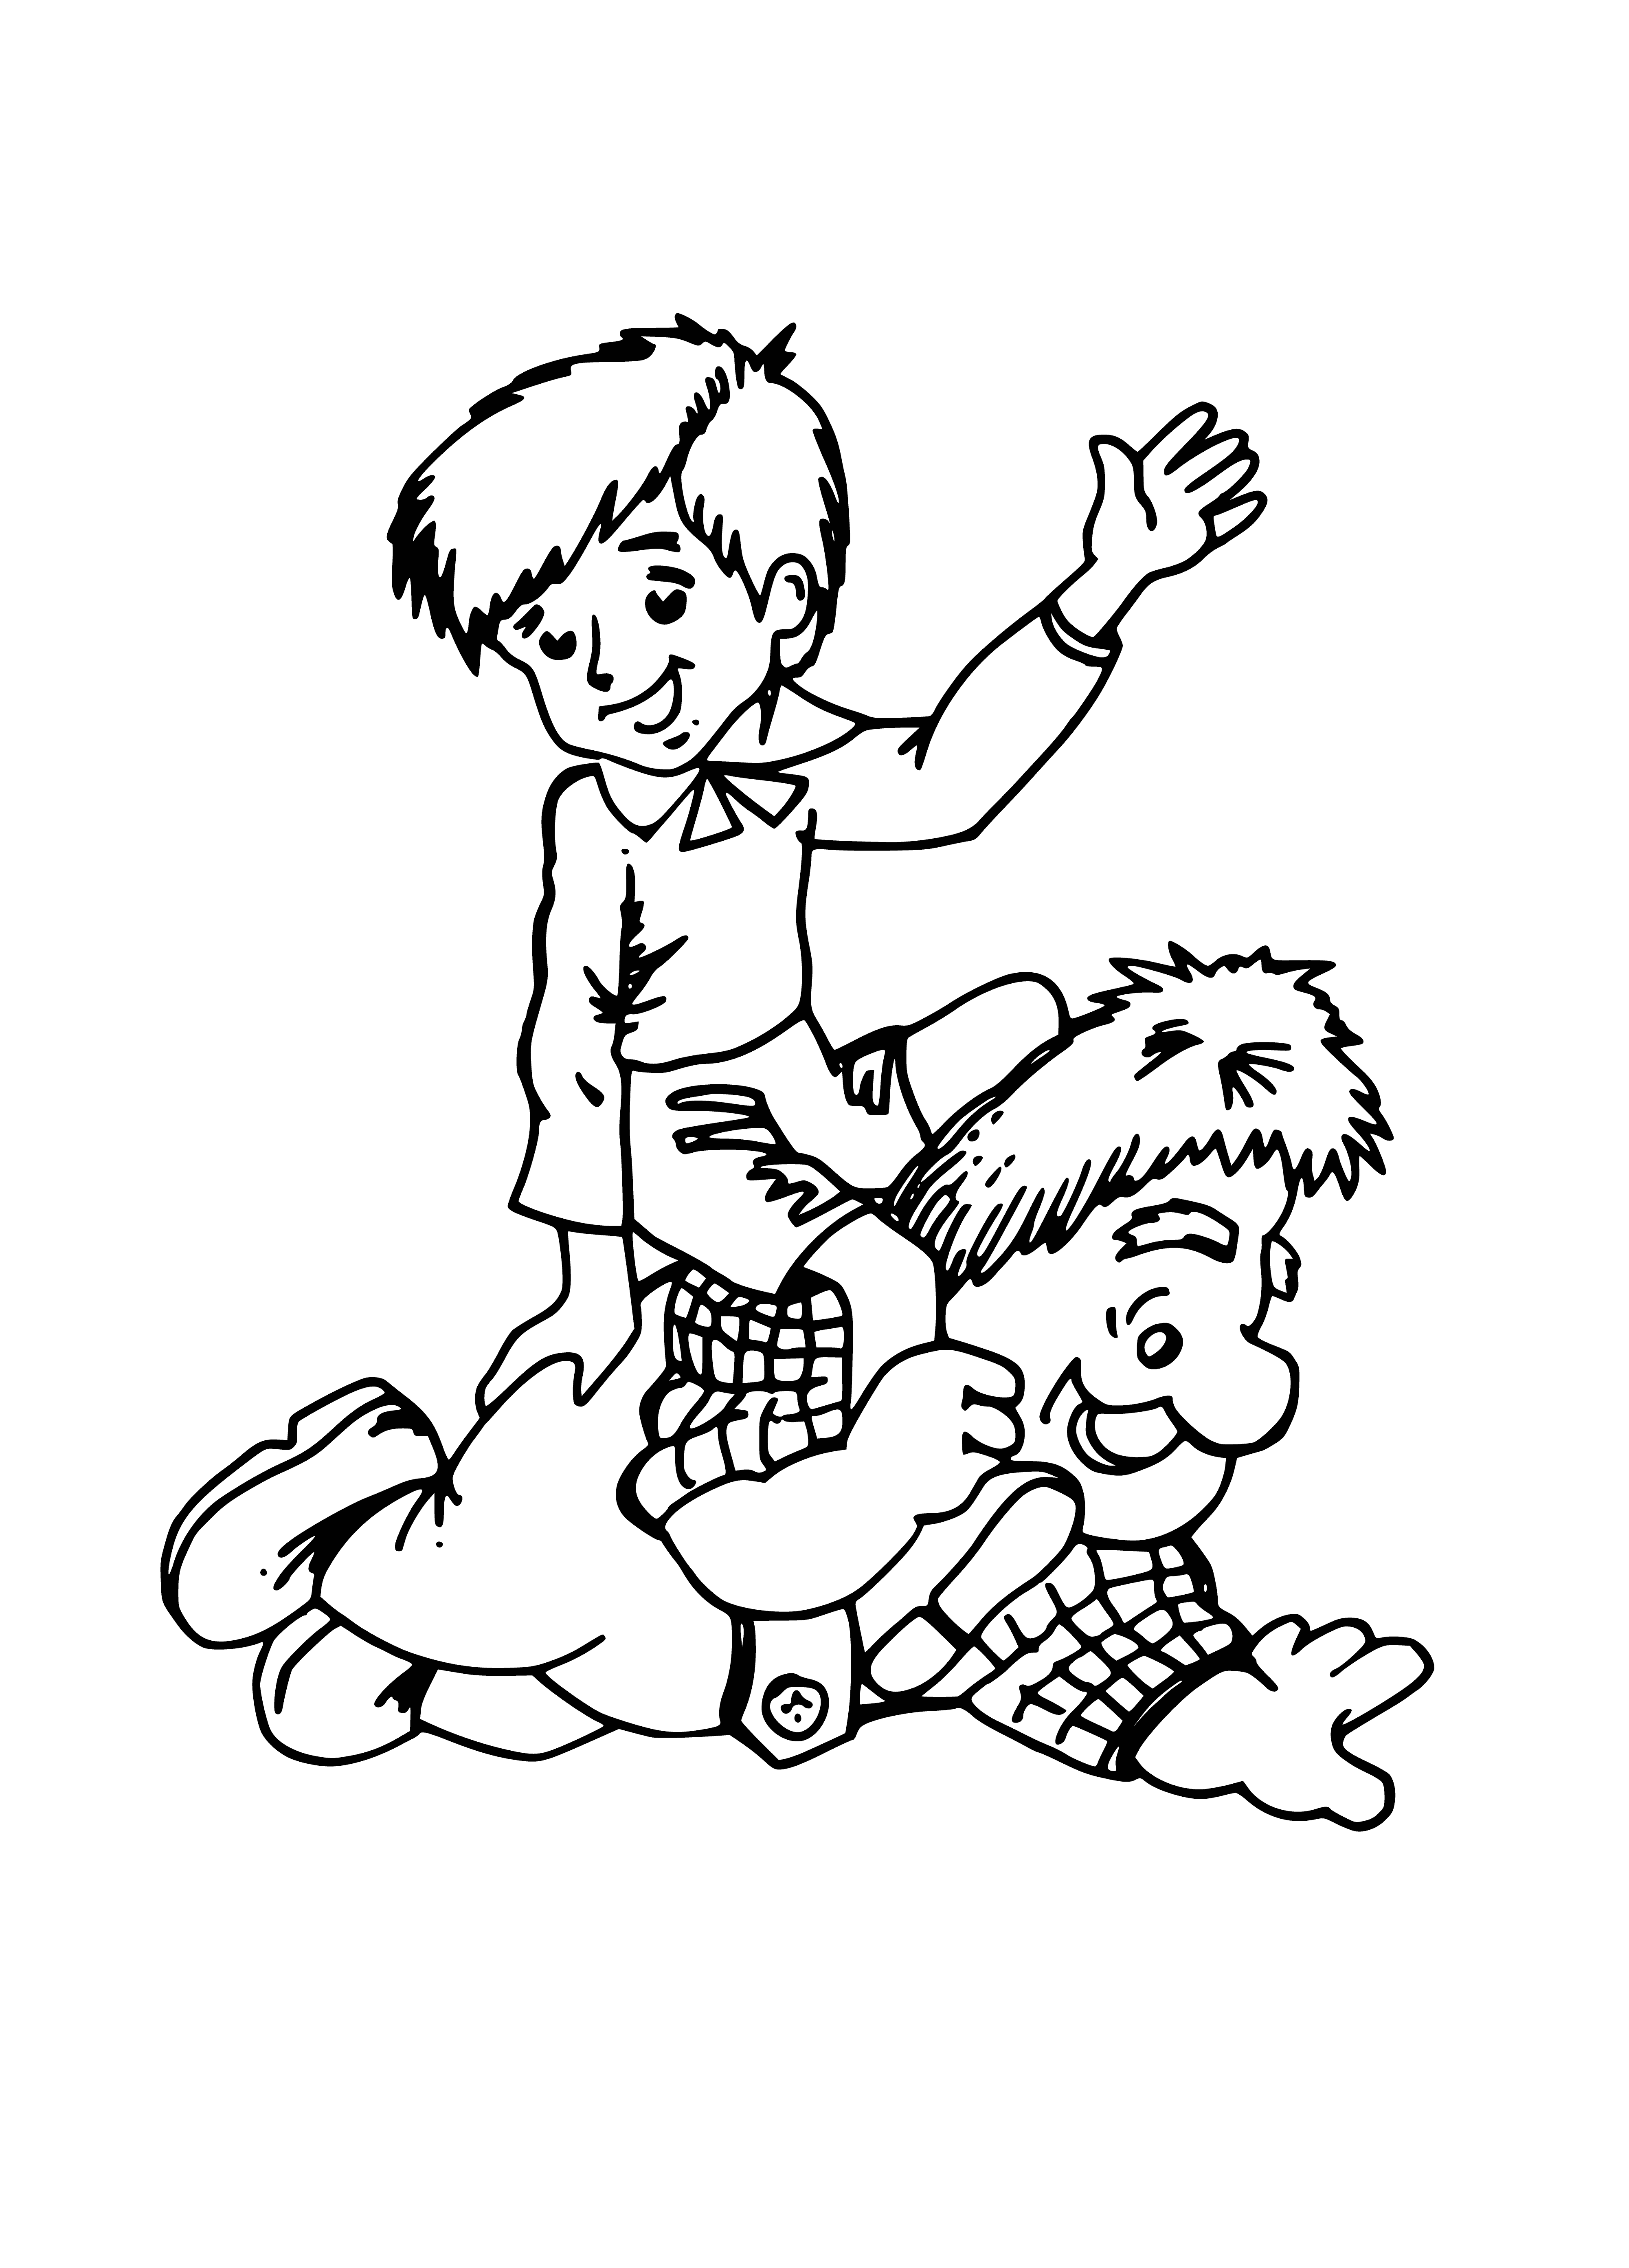 coloring page: 2 people in coloring page: child & adult in front of building, looking at each other.